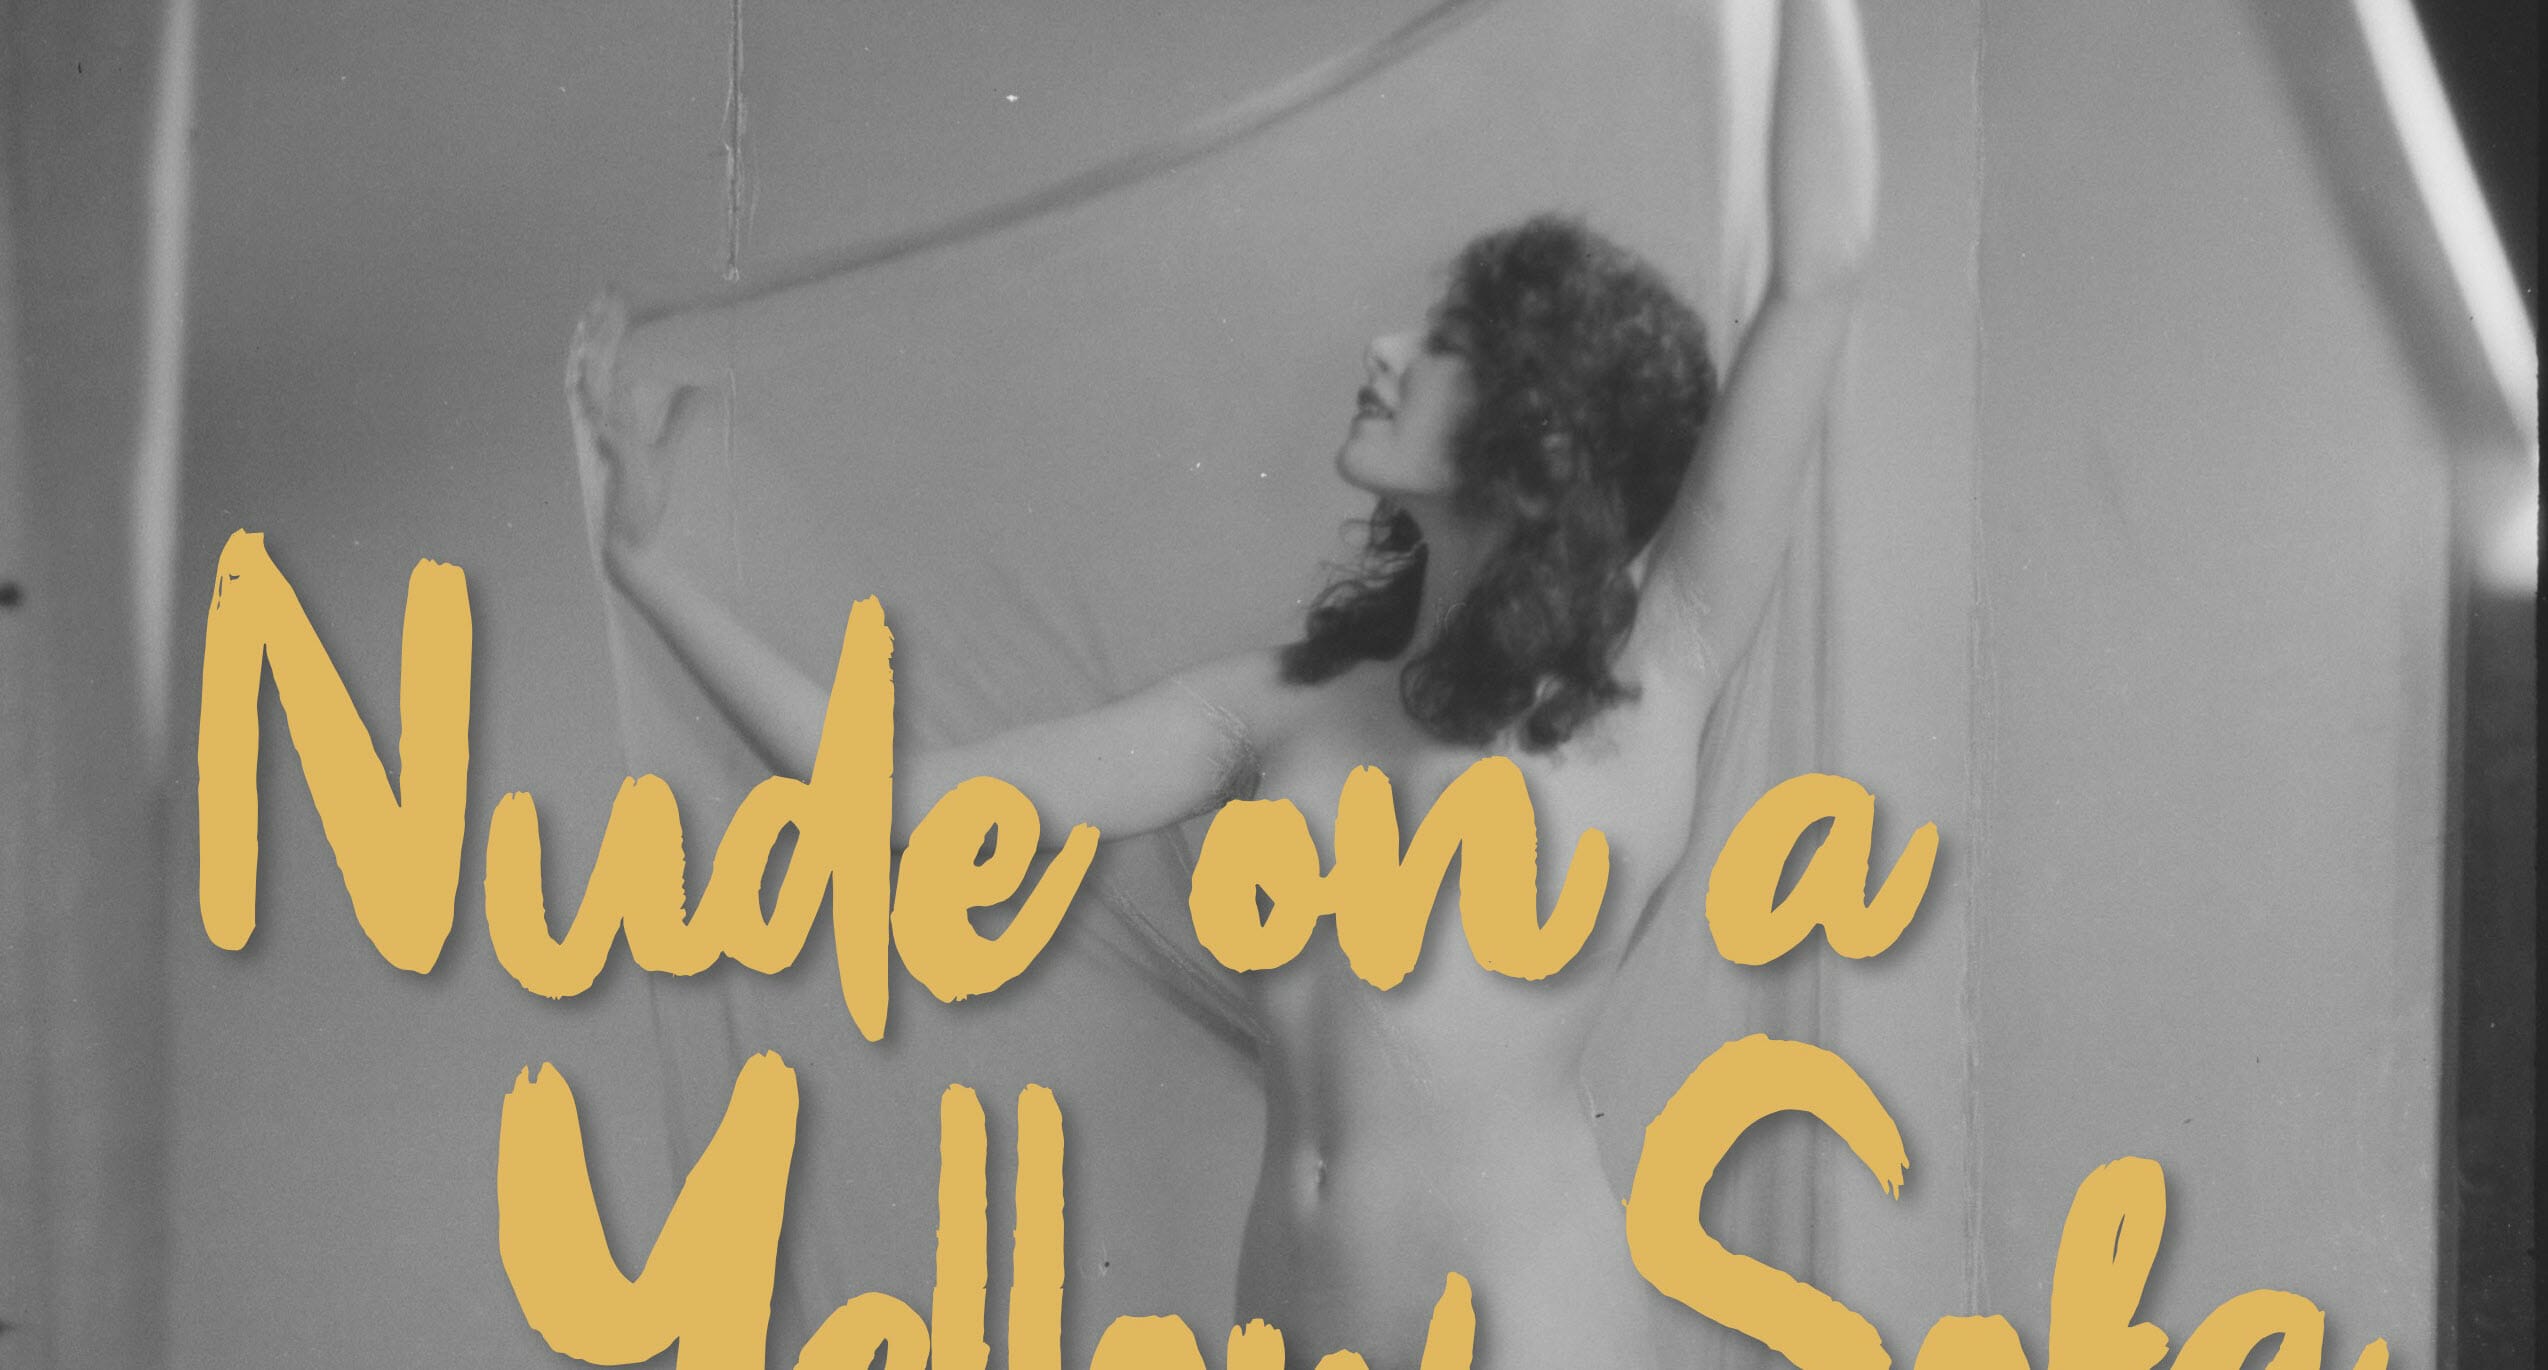 A free to download duet RPG: A review of Nora Katz’s “Nude on a Yellow Sofa”